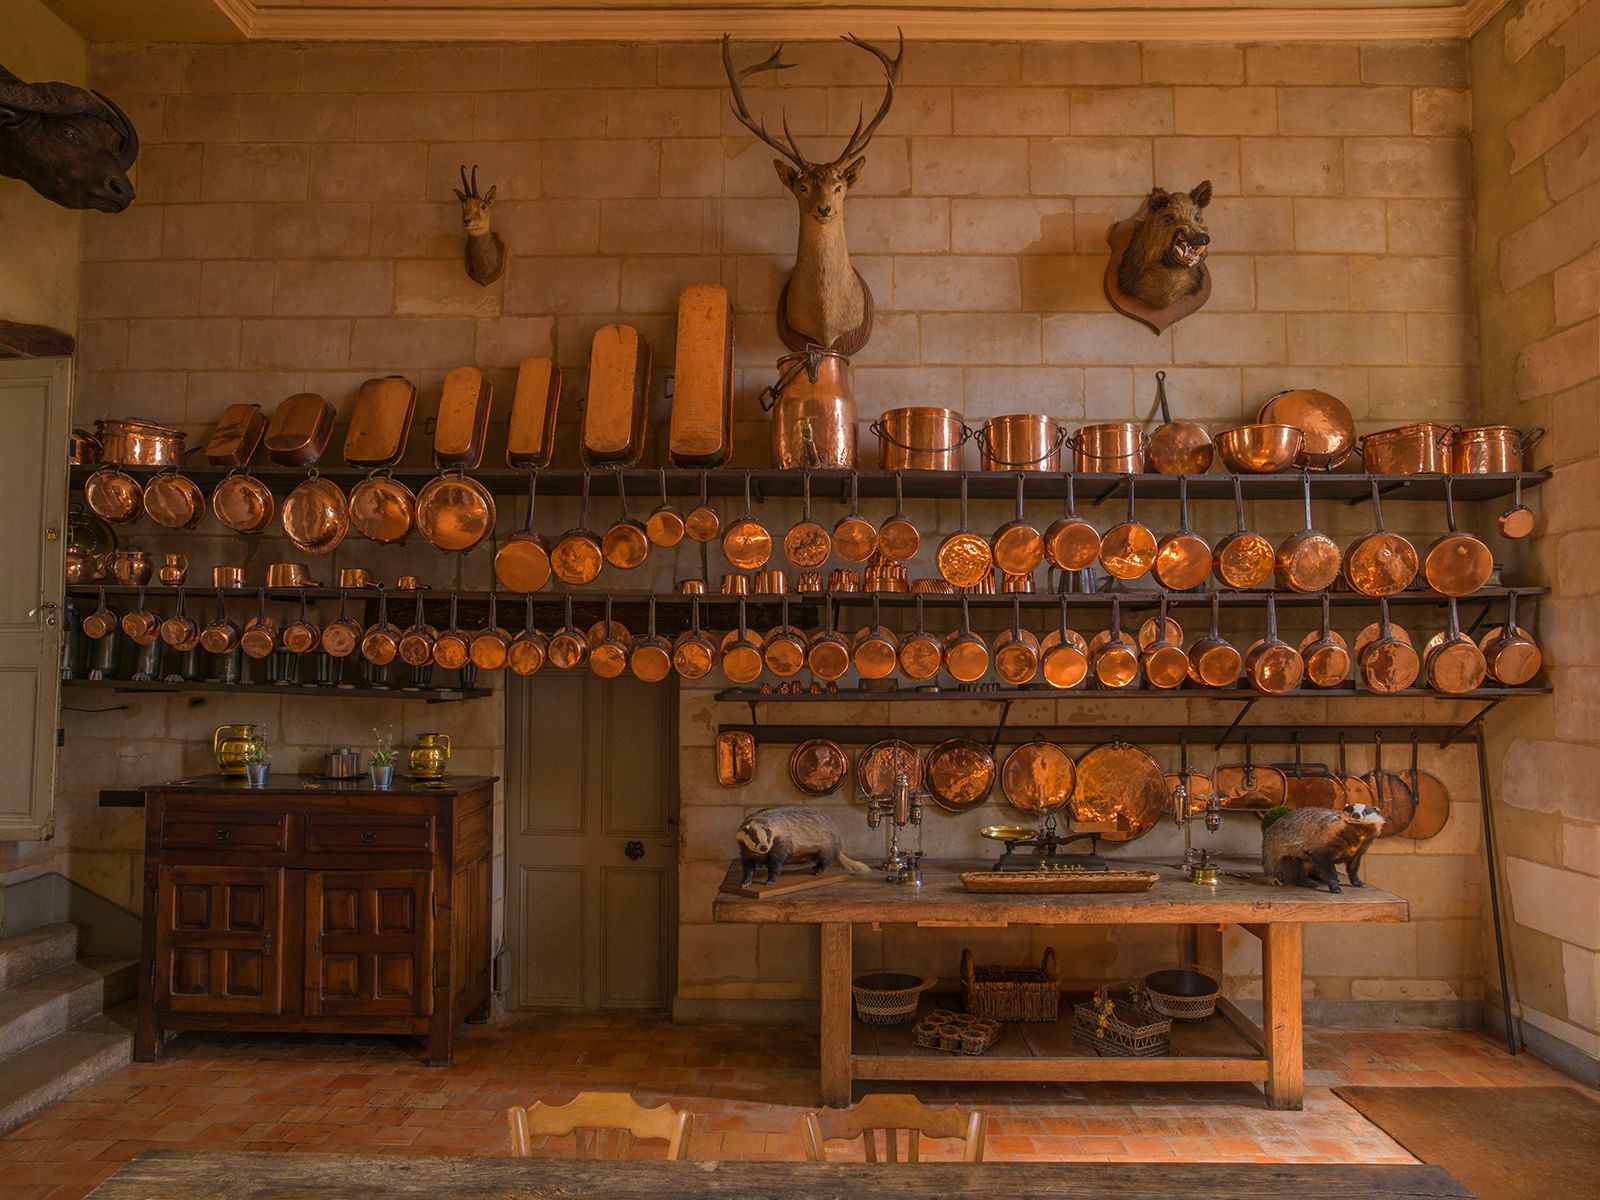 Château de Montgeoffroy, France-Kitchen with its vast  collection of Copper Cookware